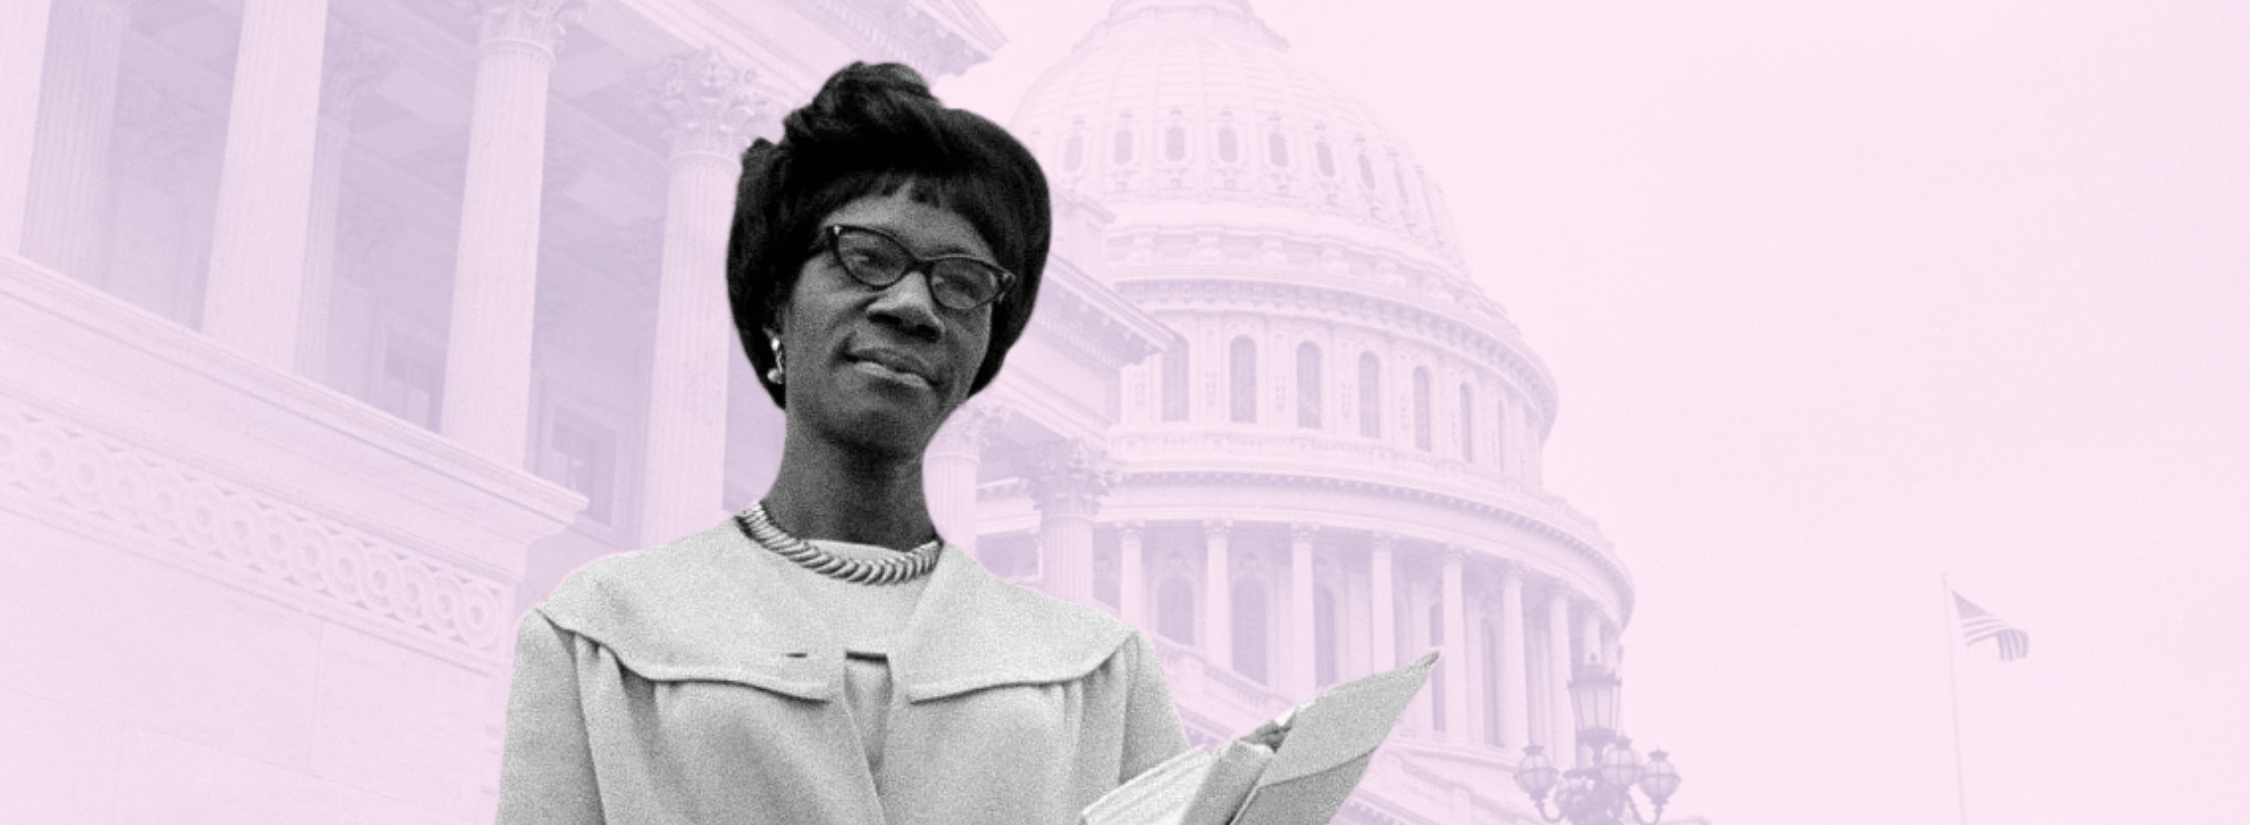 Shirley Chisholm Legacy Claimed A Seat at the Table for Black Women